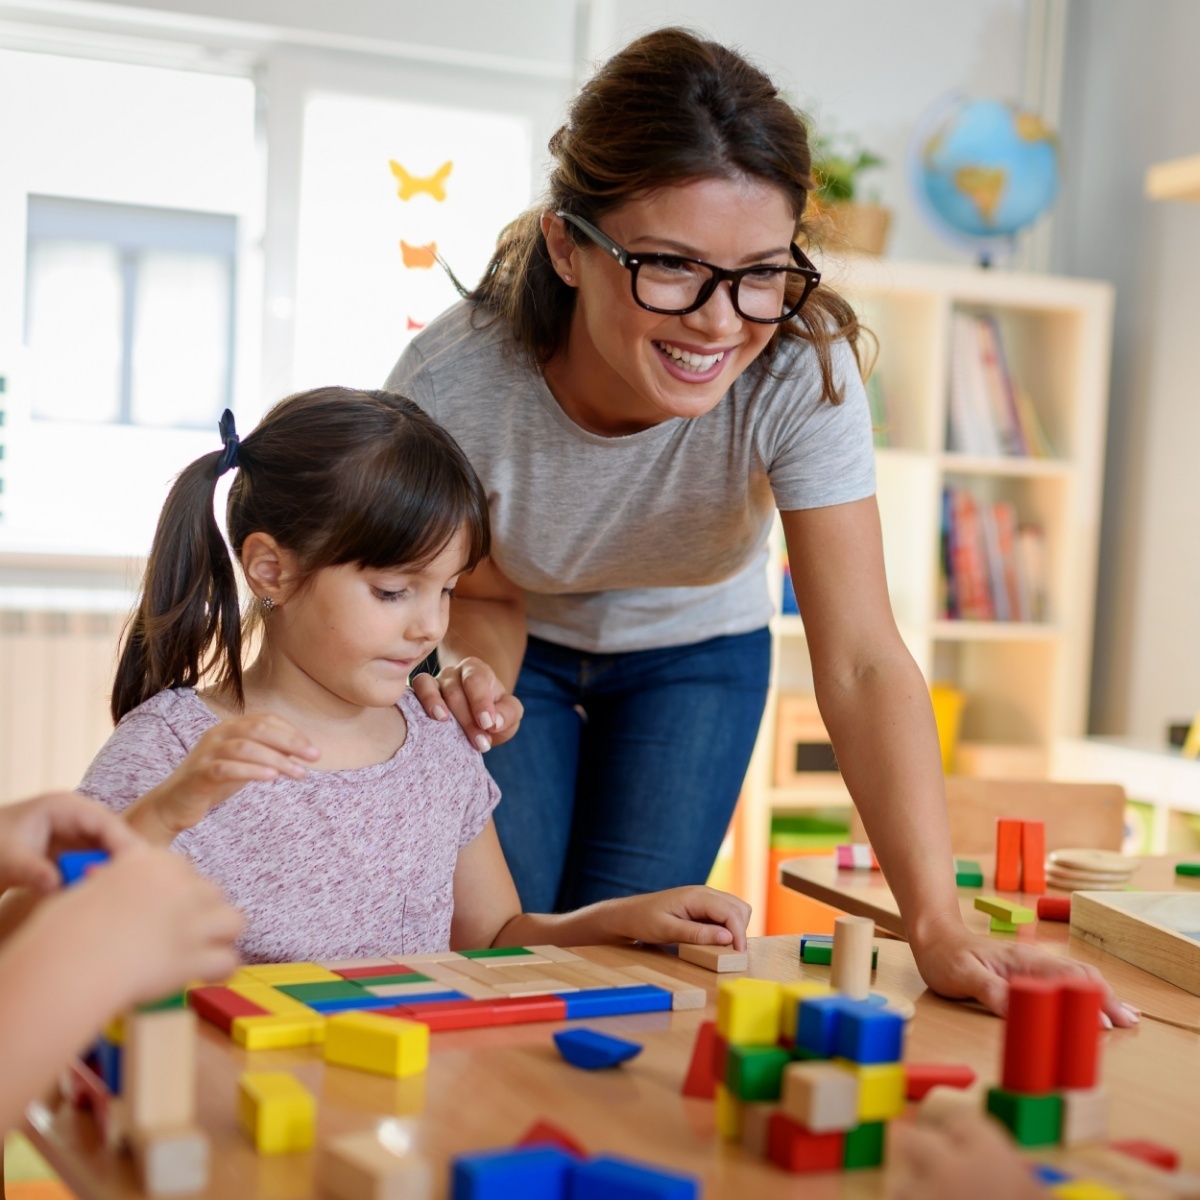 Child Care Aware - Real Support for Child Care Providers